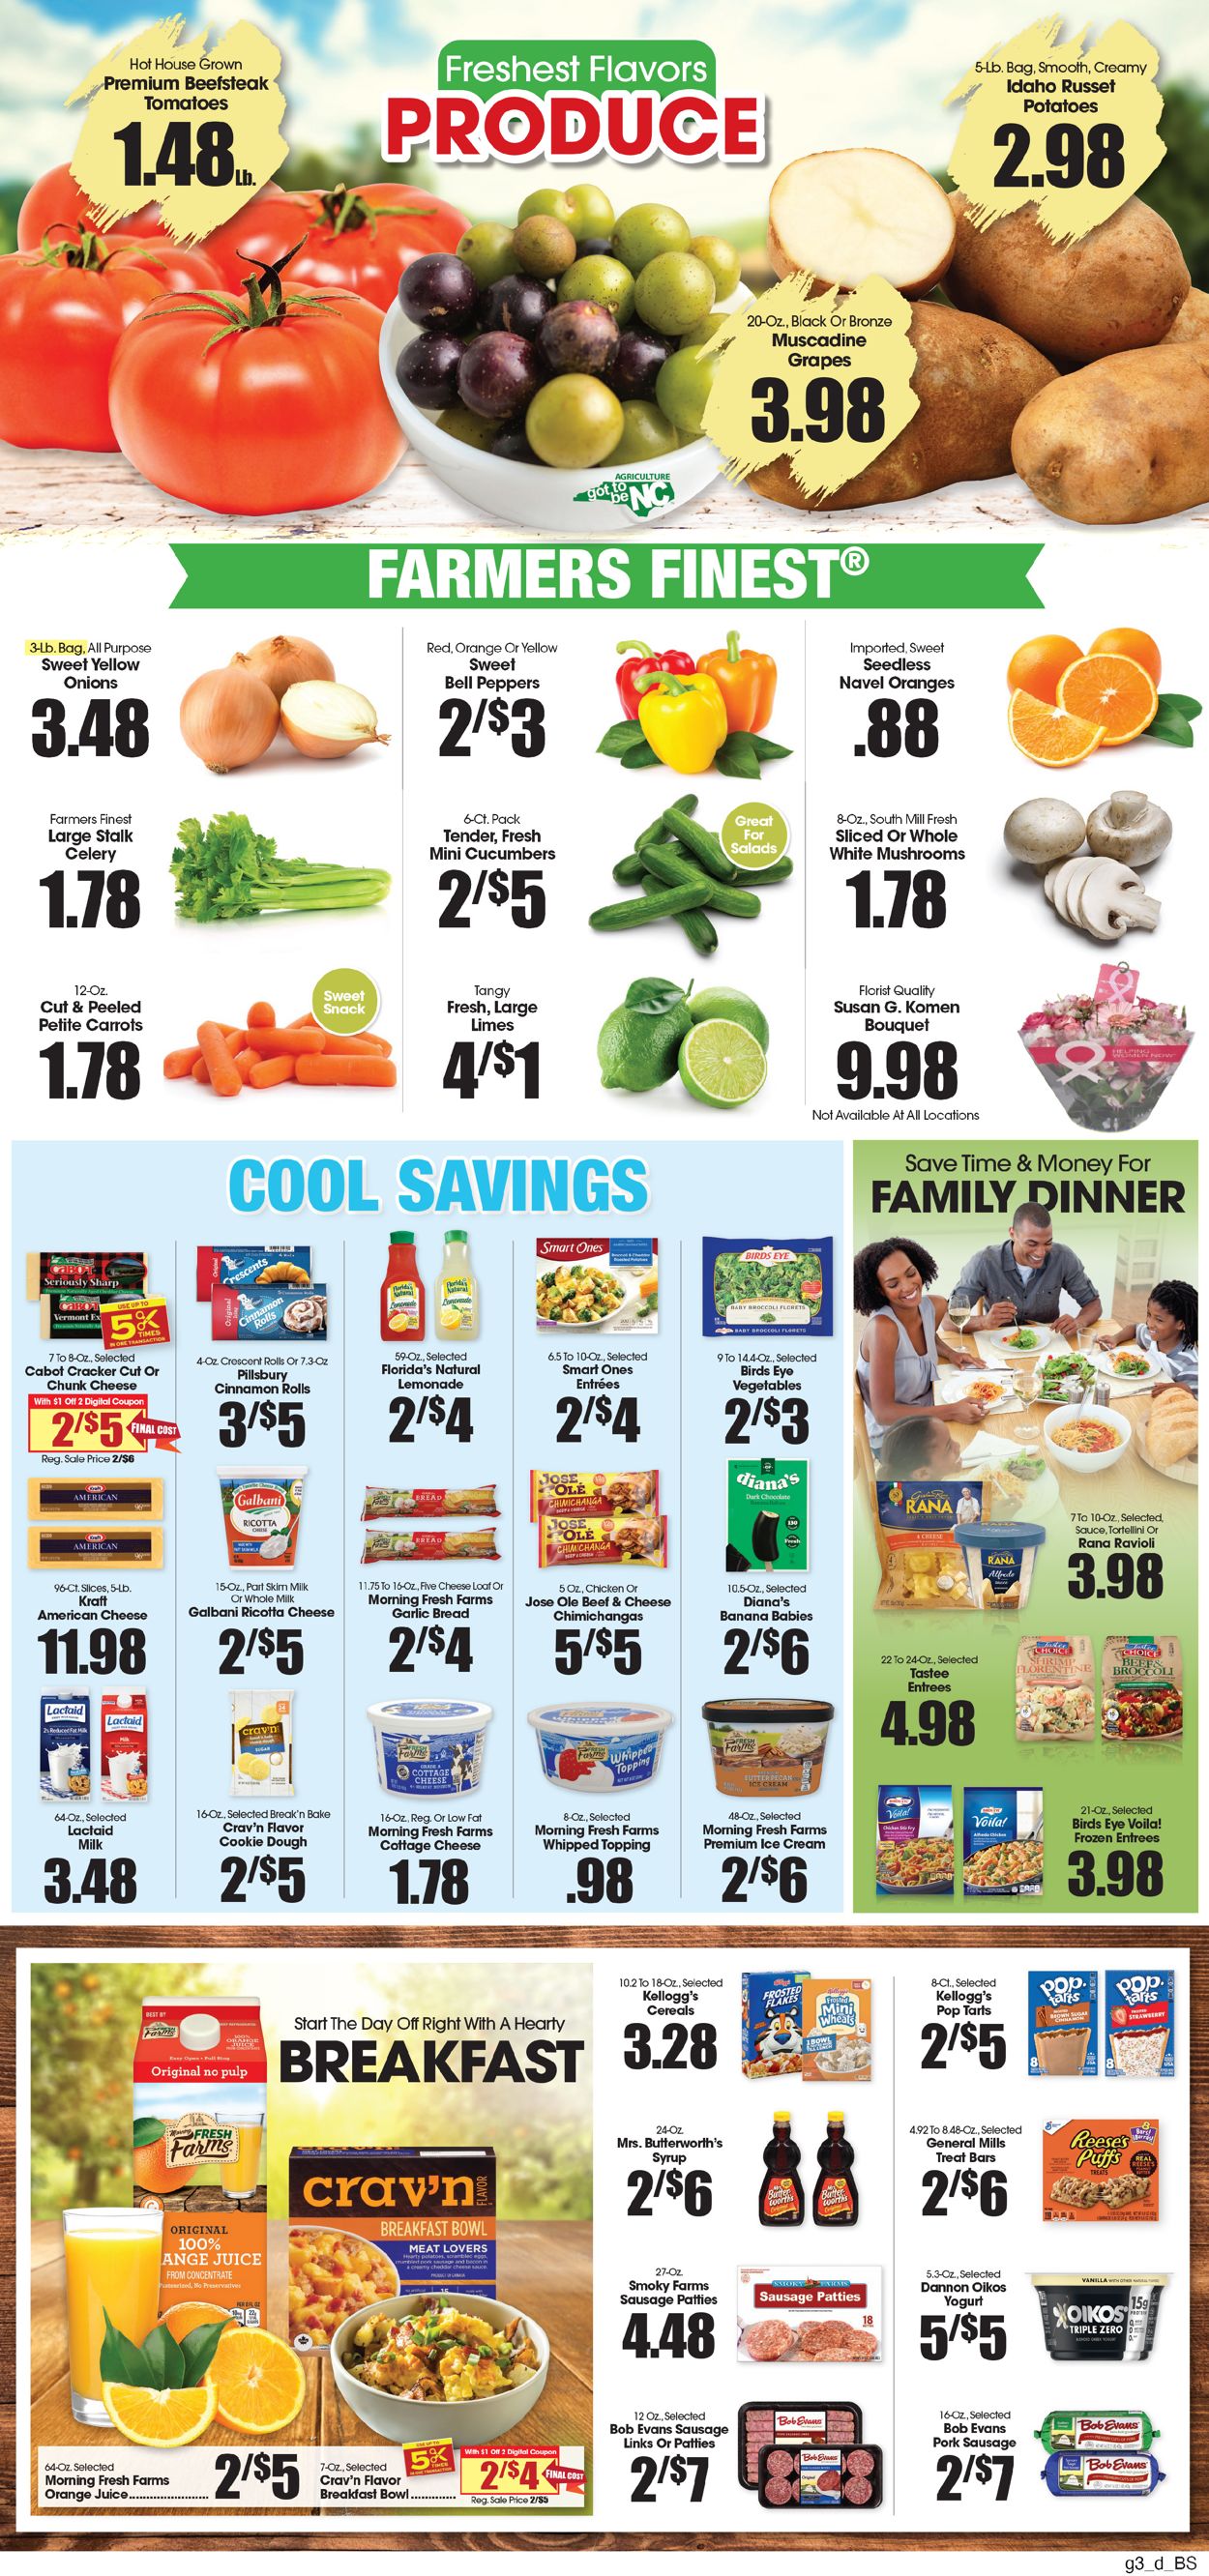 Food King Ad from 09/29/2021